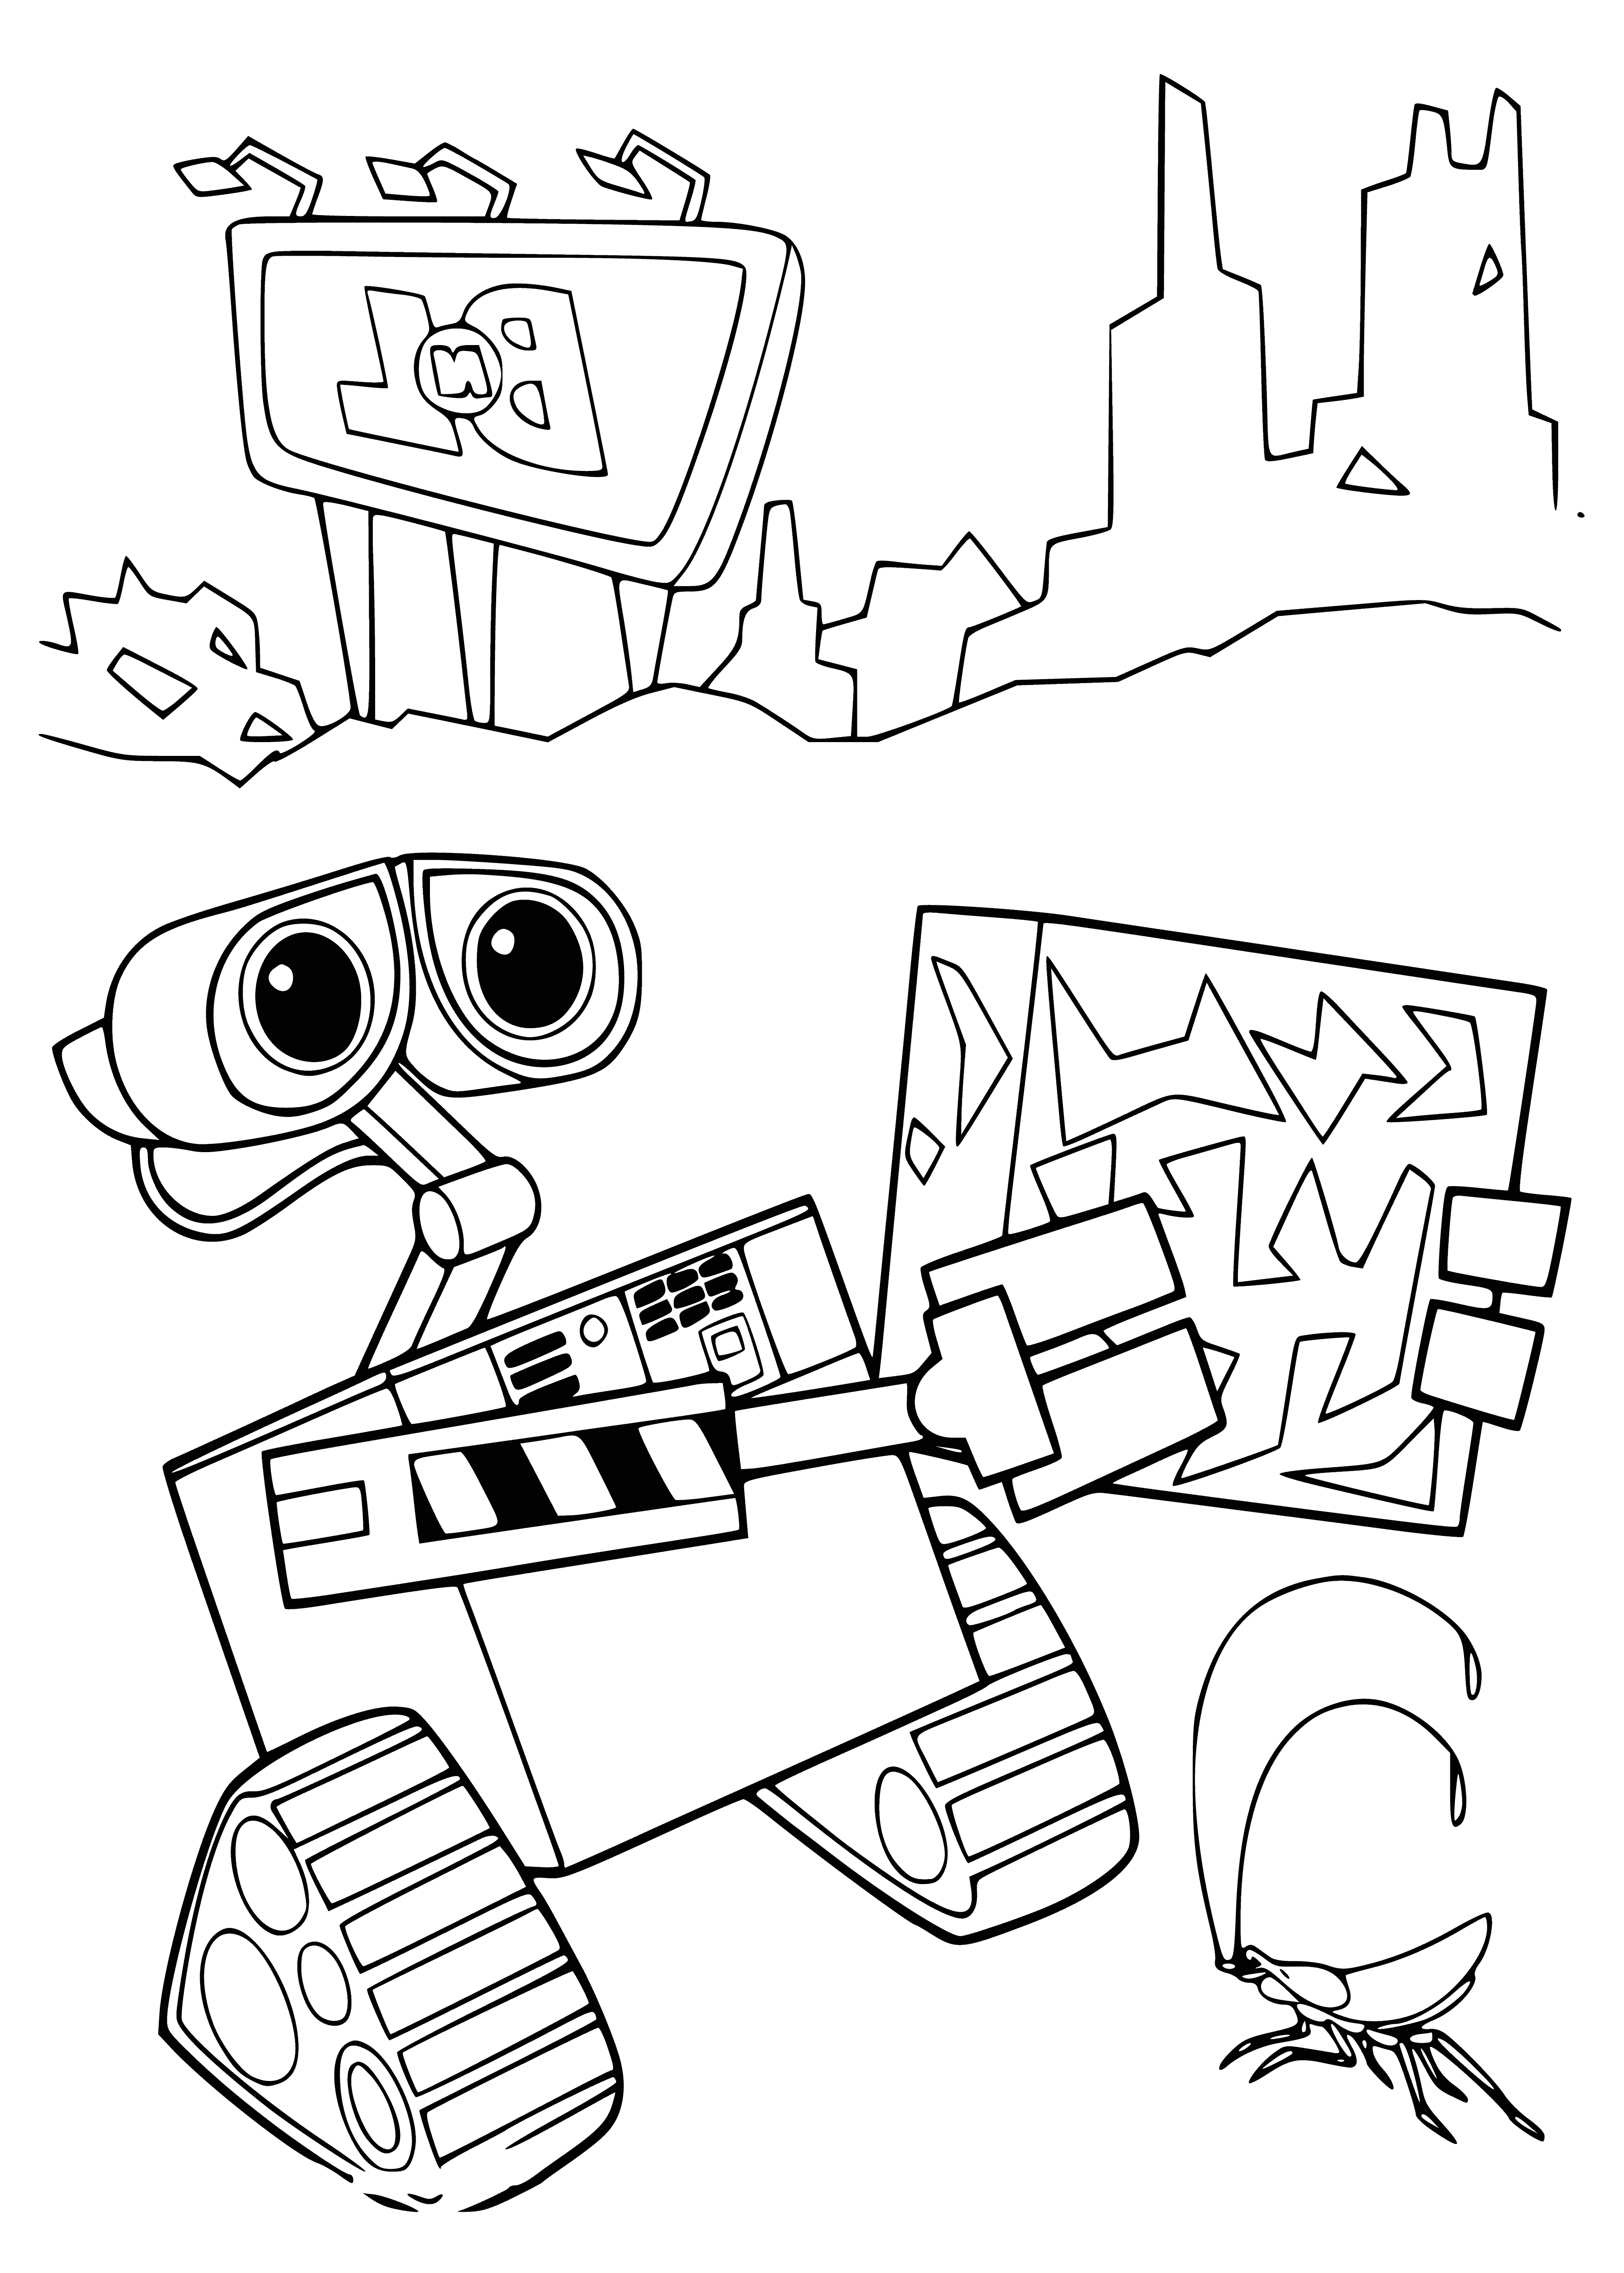 coloring page: Wall-e is alone in a trash-filled valley, surrounded by distant mountains.